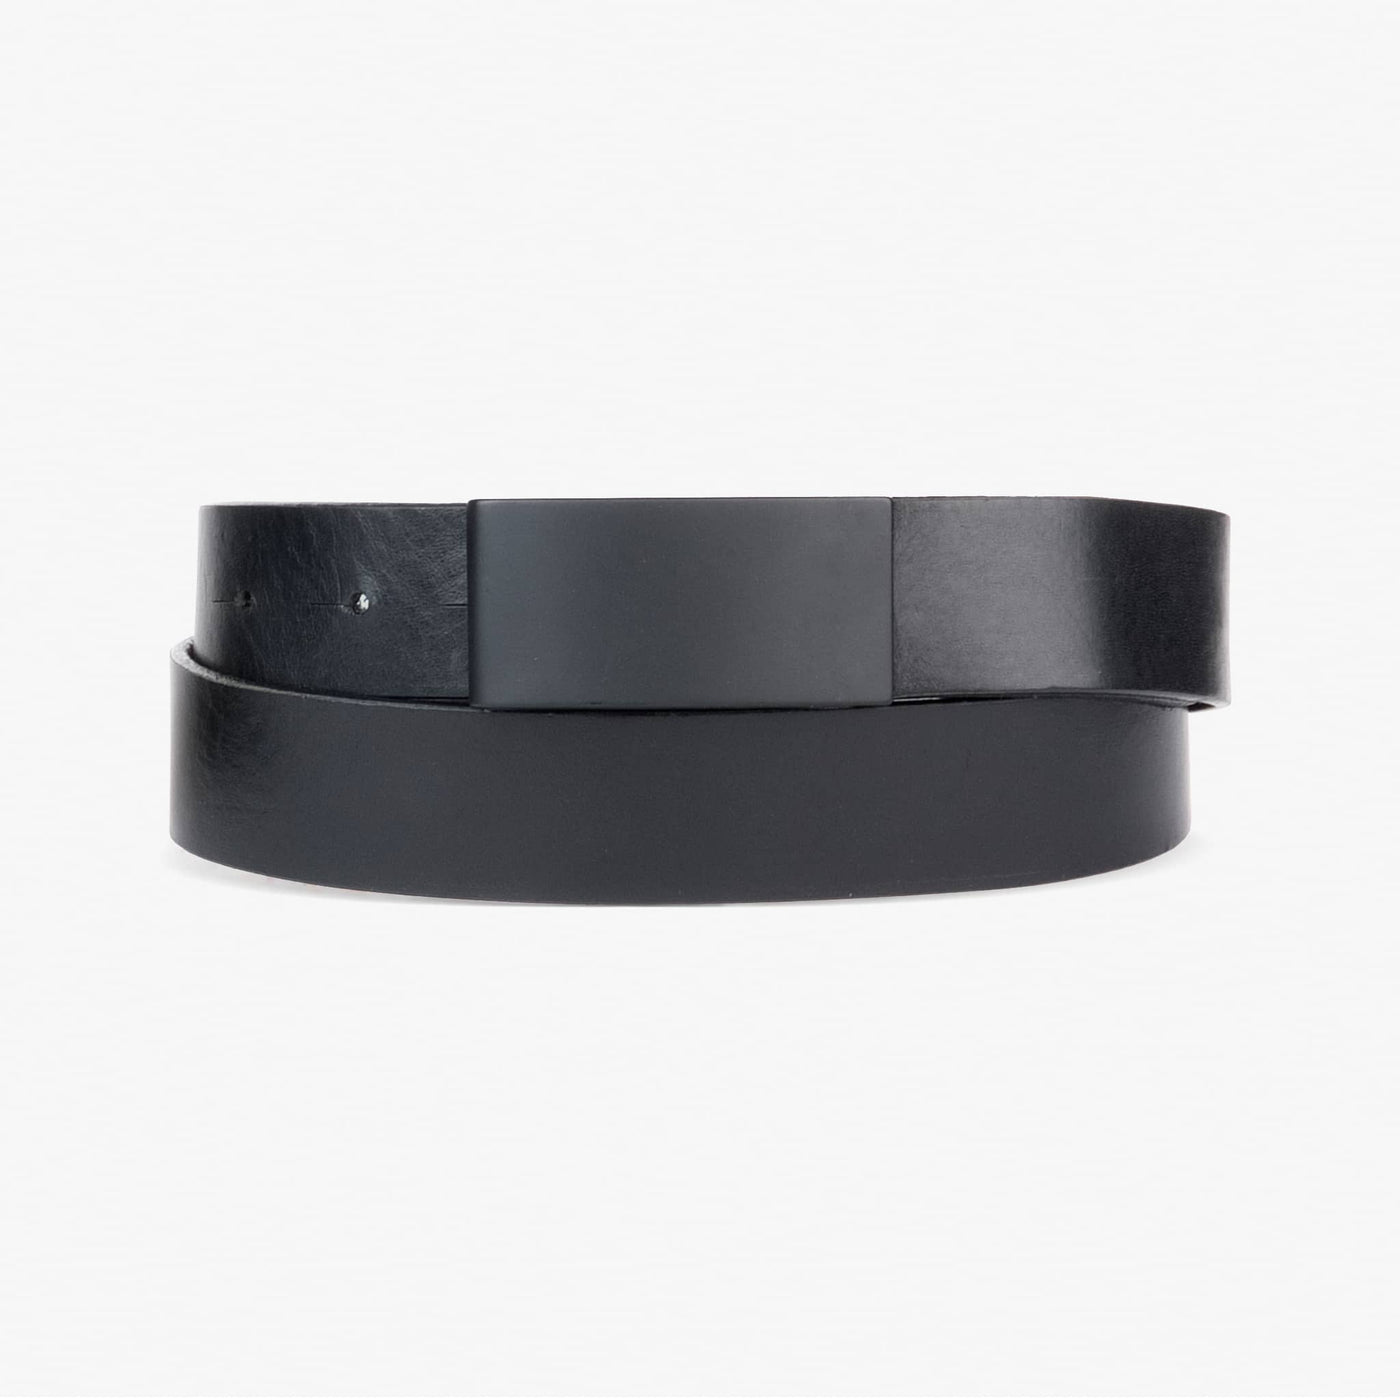 Pere Bridle BRAVE Leather Belt -- Custom Made for You